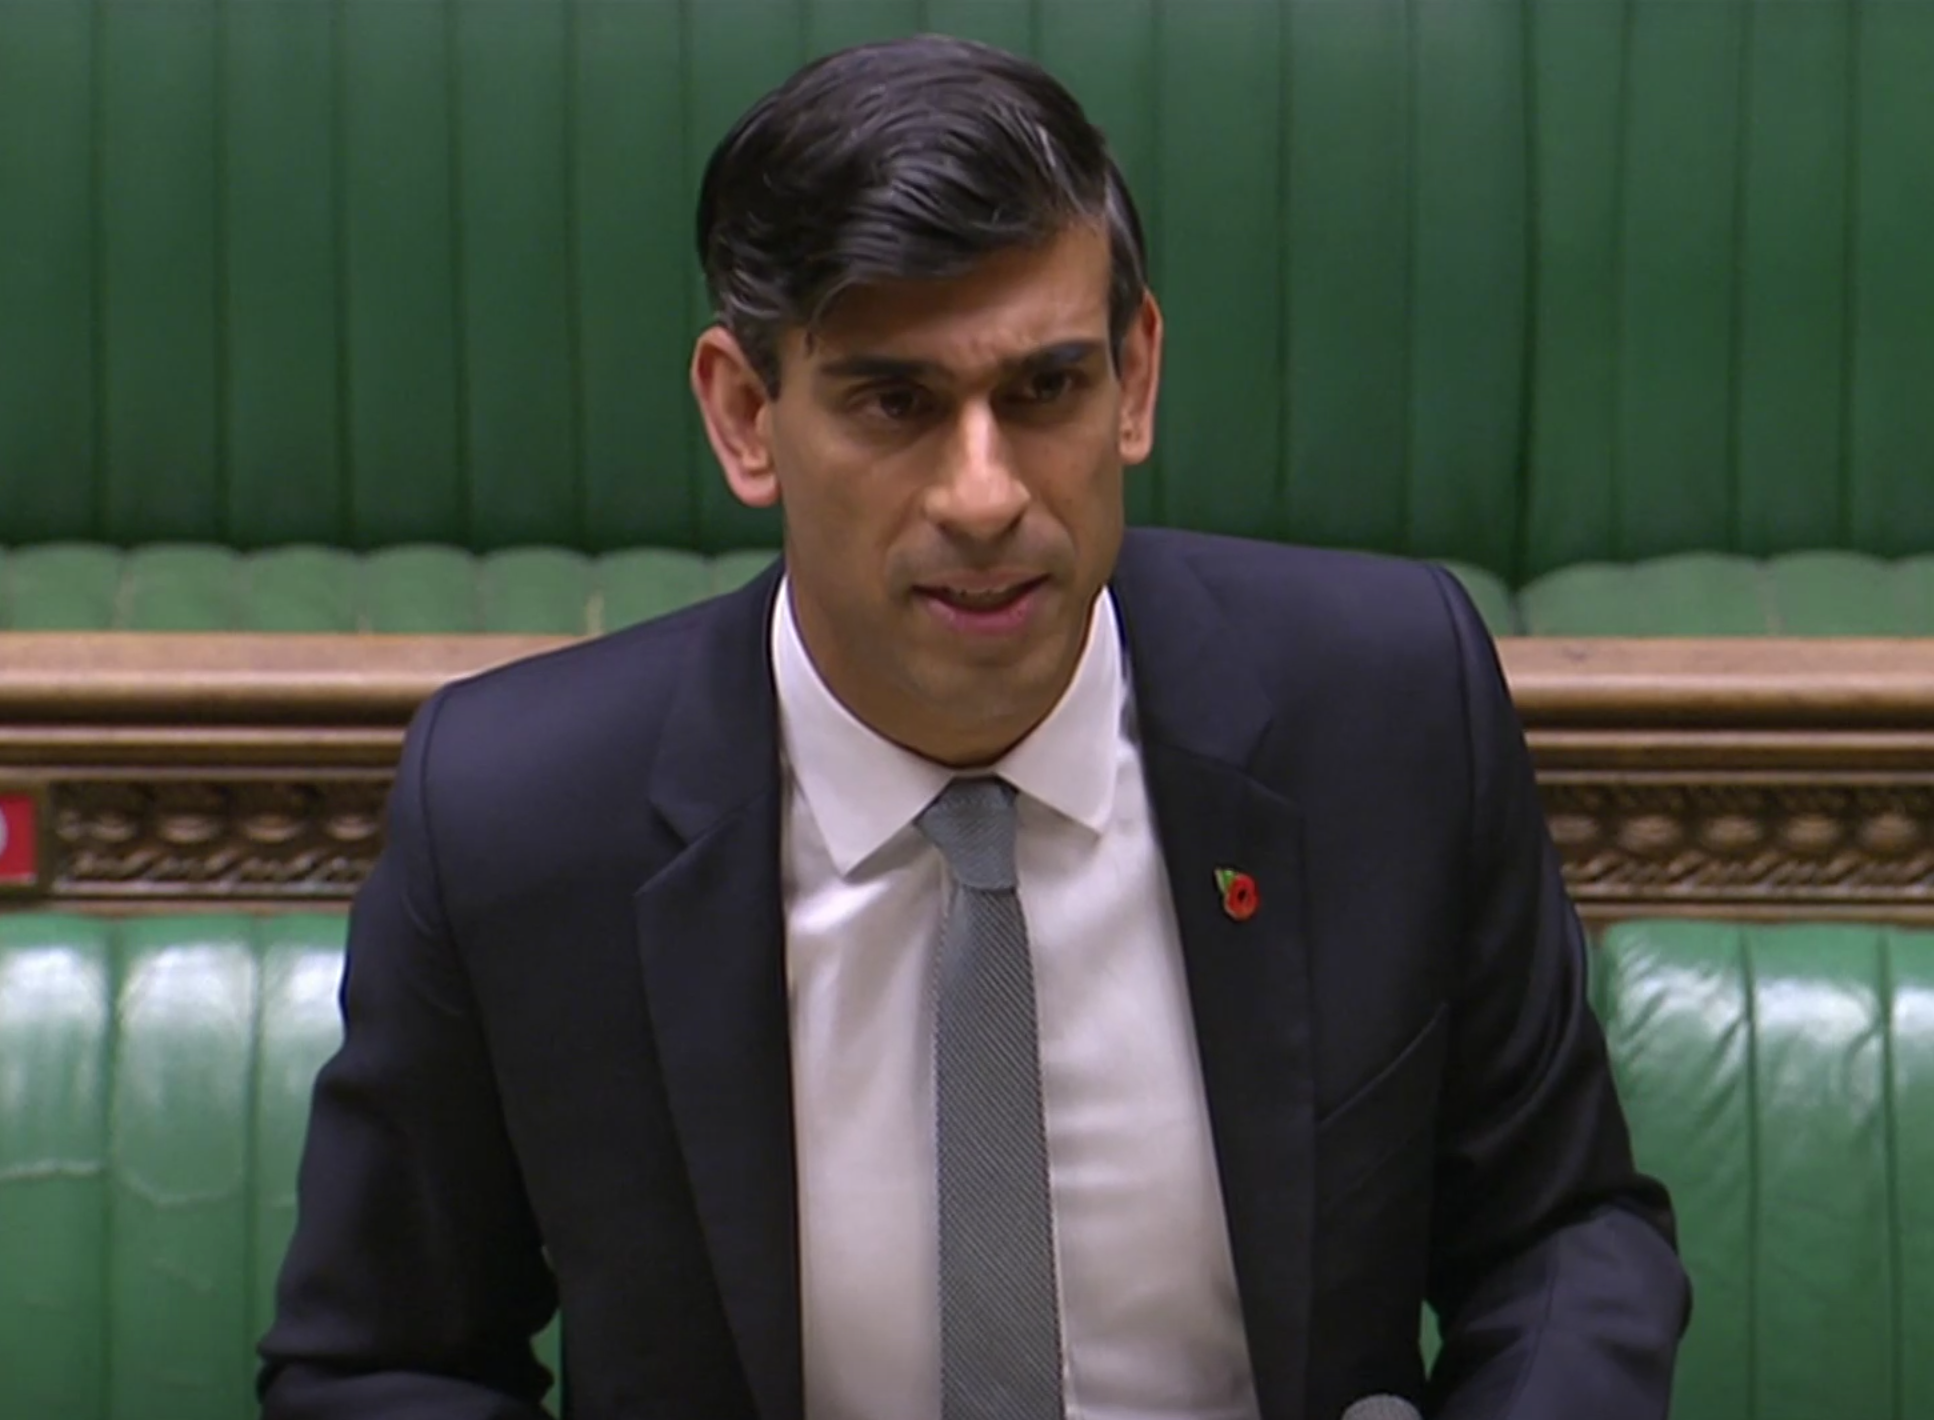 Rishi Sunak in the House of Commons